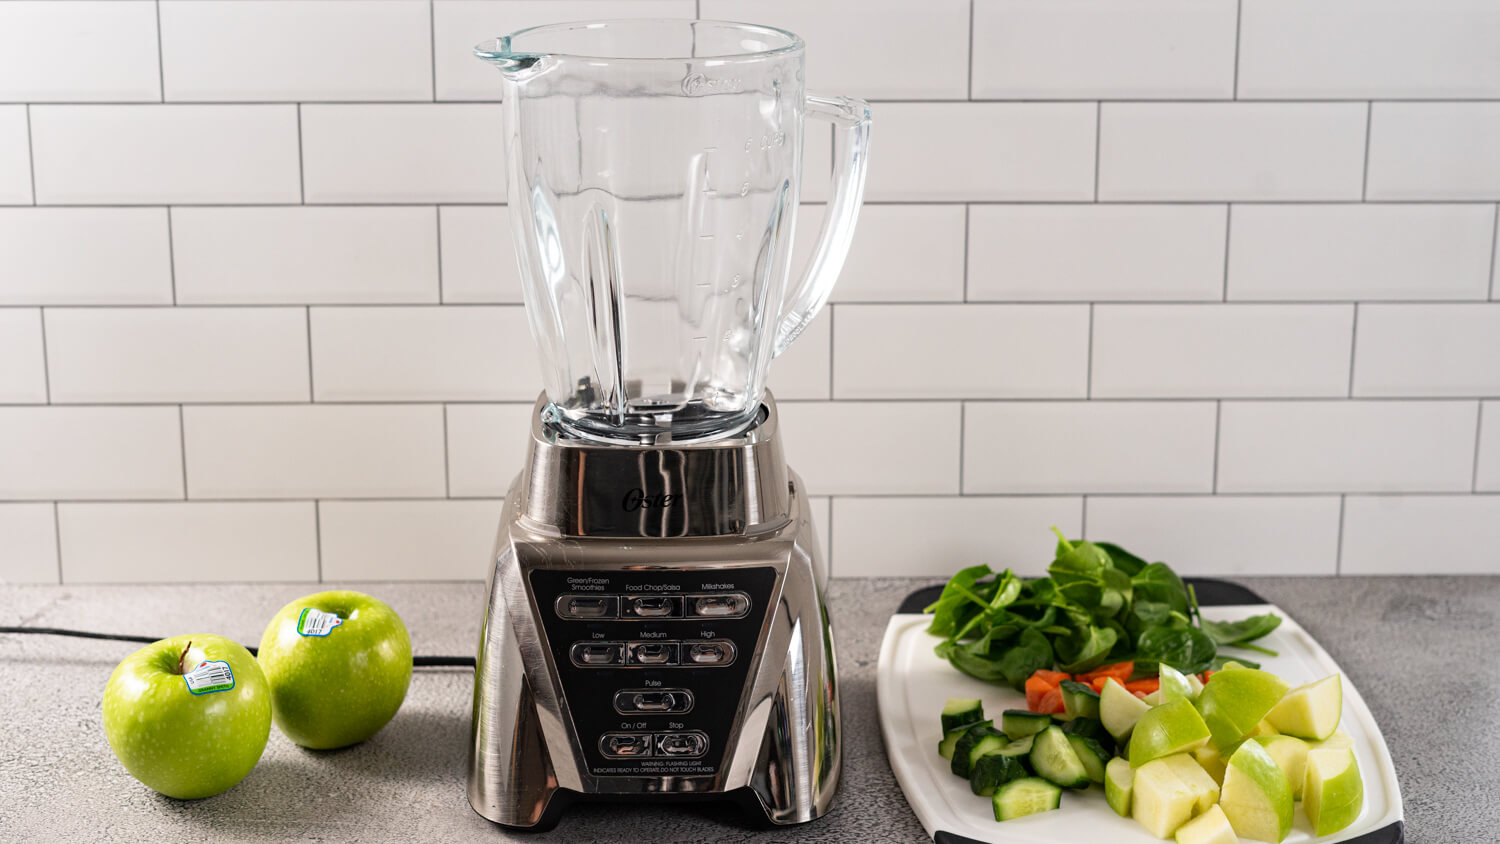 A blender with ingredients next to it to make a green apple smoothie (spinach, apples, carrots, cucumbers).